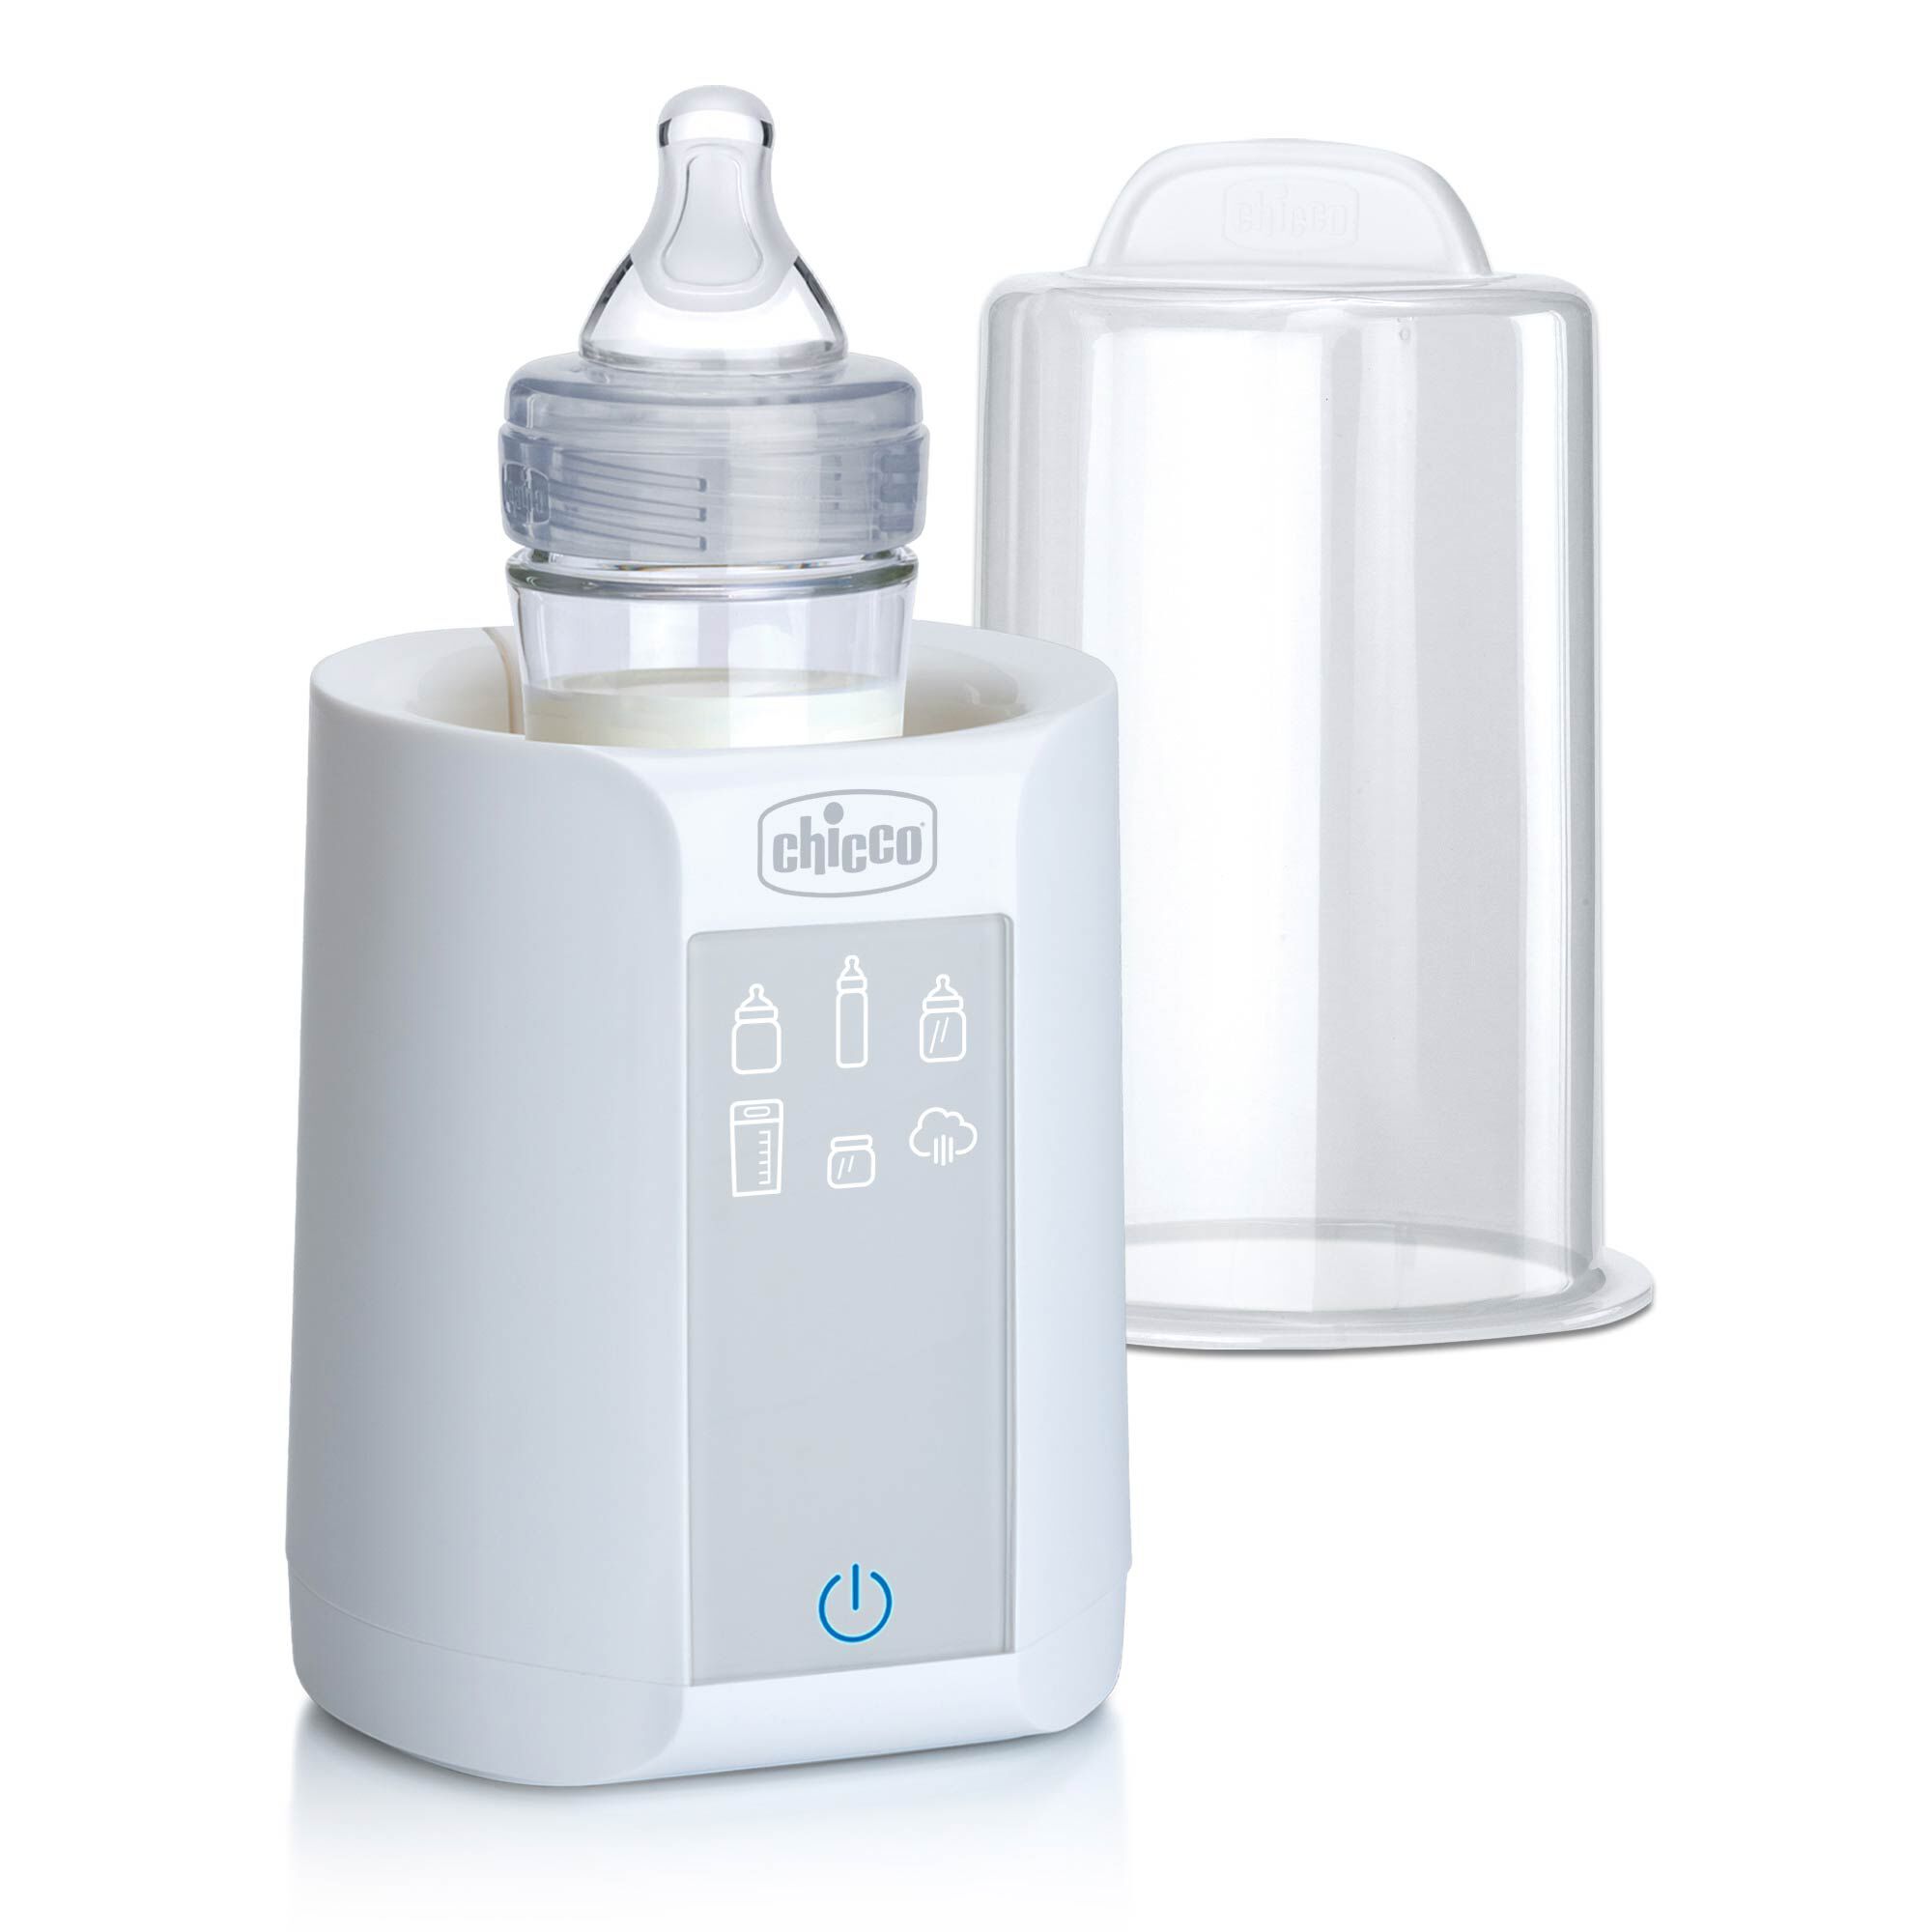 Hot private label electric bottle with mixer, electric water bottle